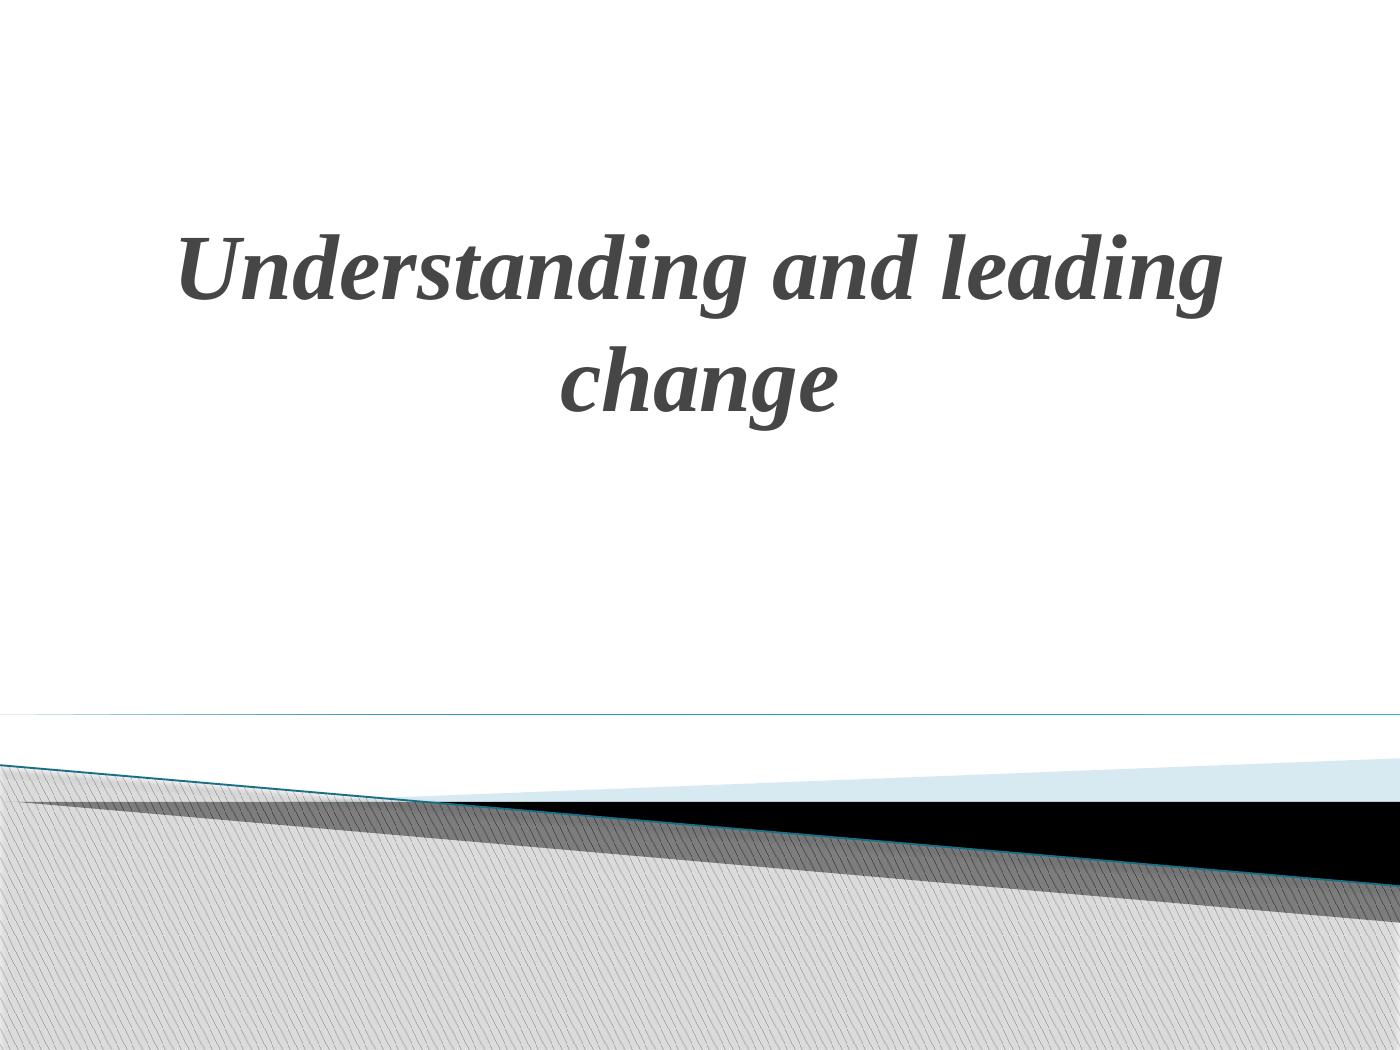 Different Leadership Approaches to Deal with Changes_1